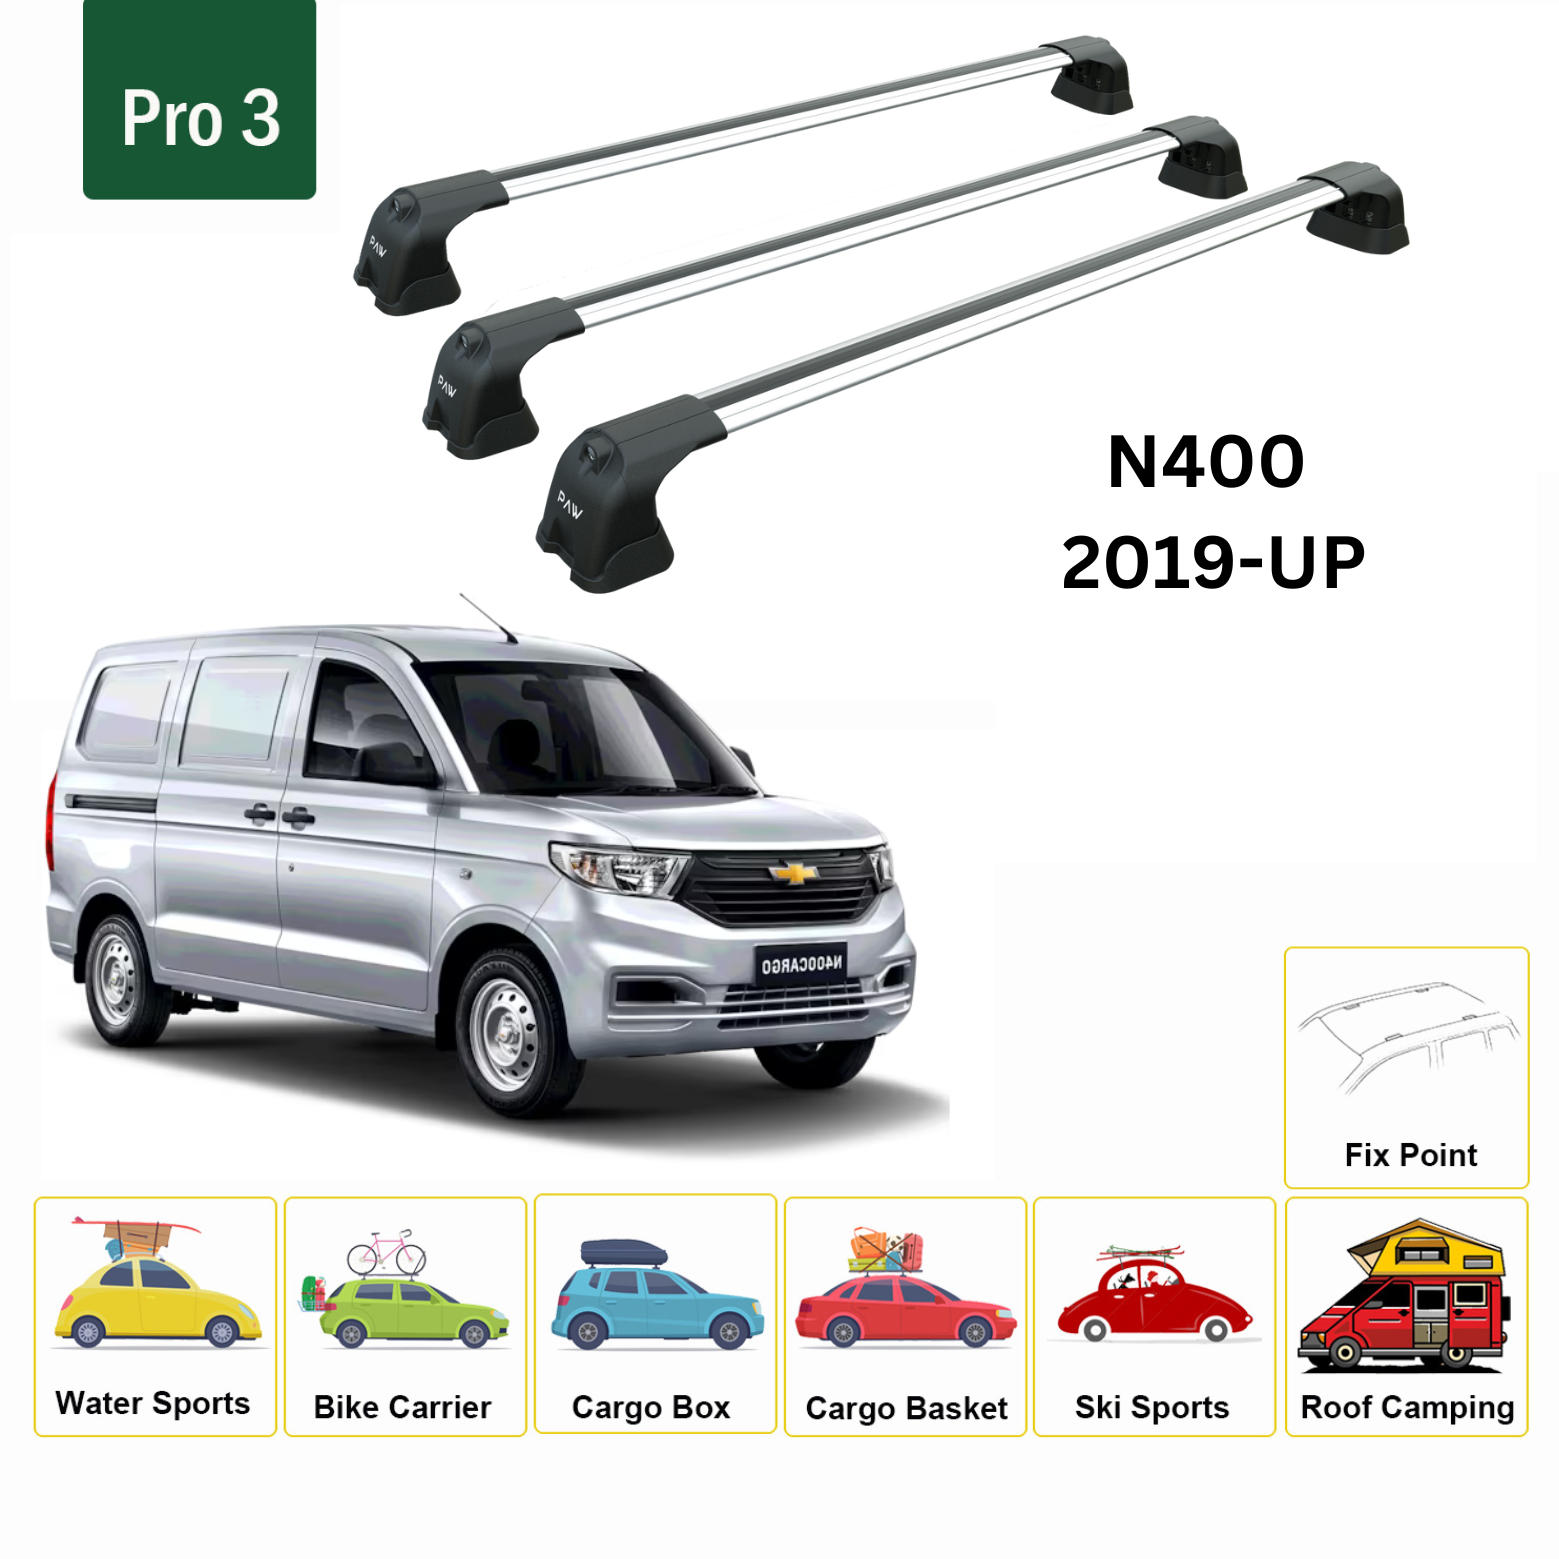 For Chevrolet N400 2019-Up Roof Rack Cross Bars Metal Bracket Fix Point 3 Qty. Alu Silver - 0